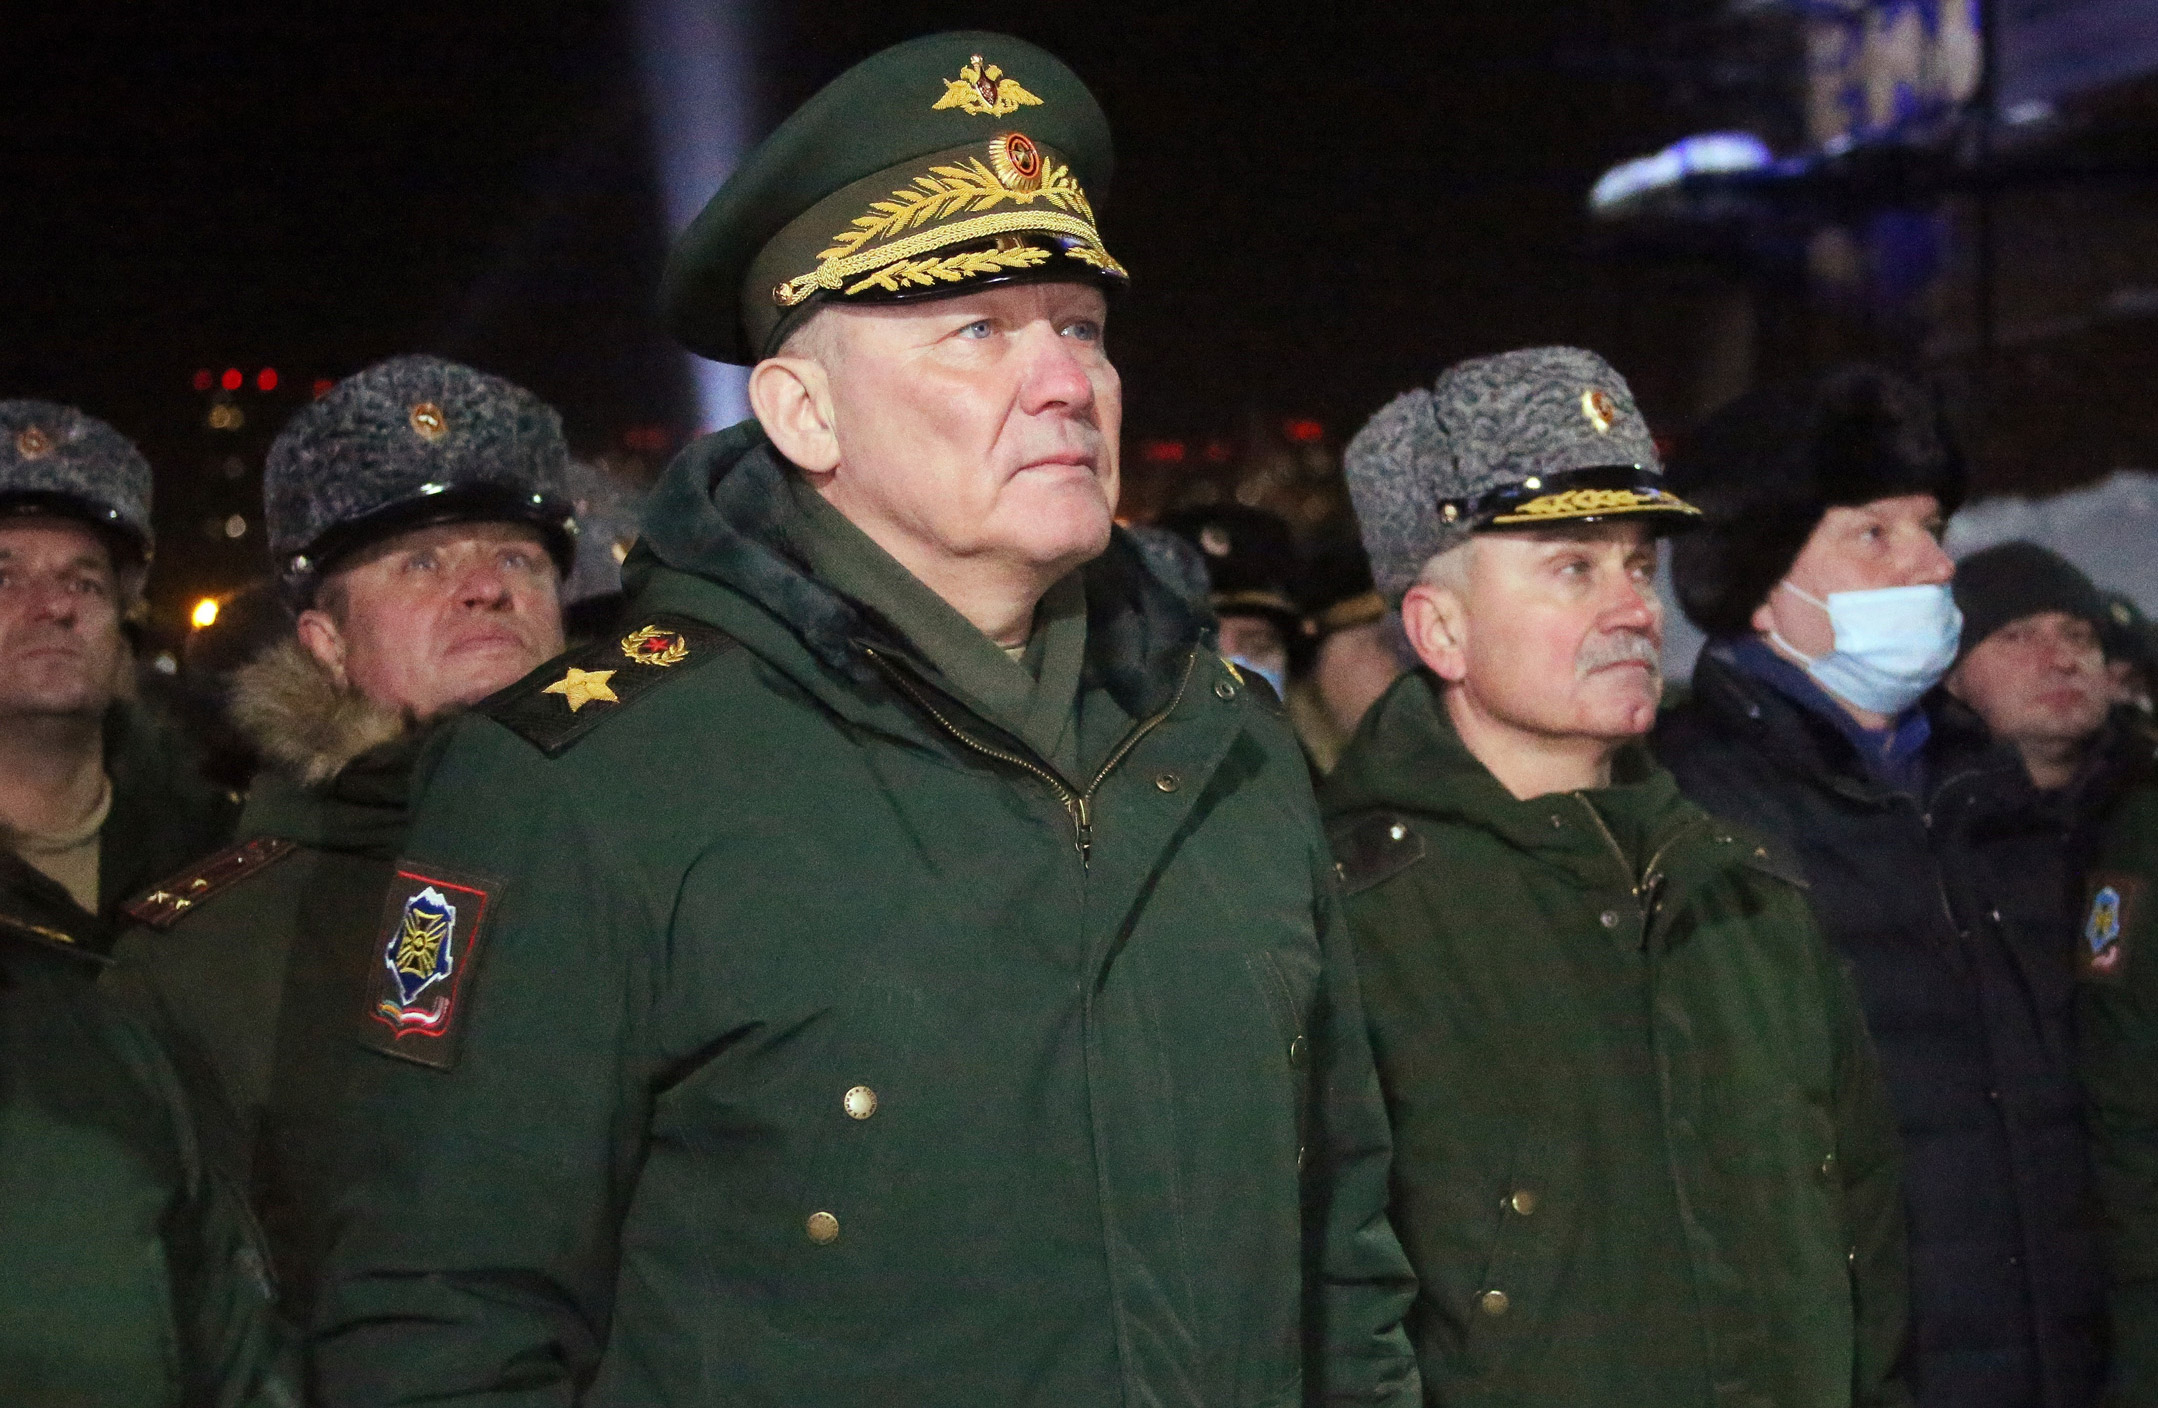 Gen. Alexander Dvornikov is seen in this file photo during a religious ceremony in Rostov-on-Don, Russia on Jan. 19, 2021.